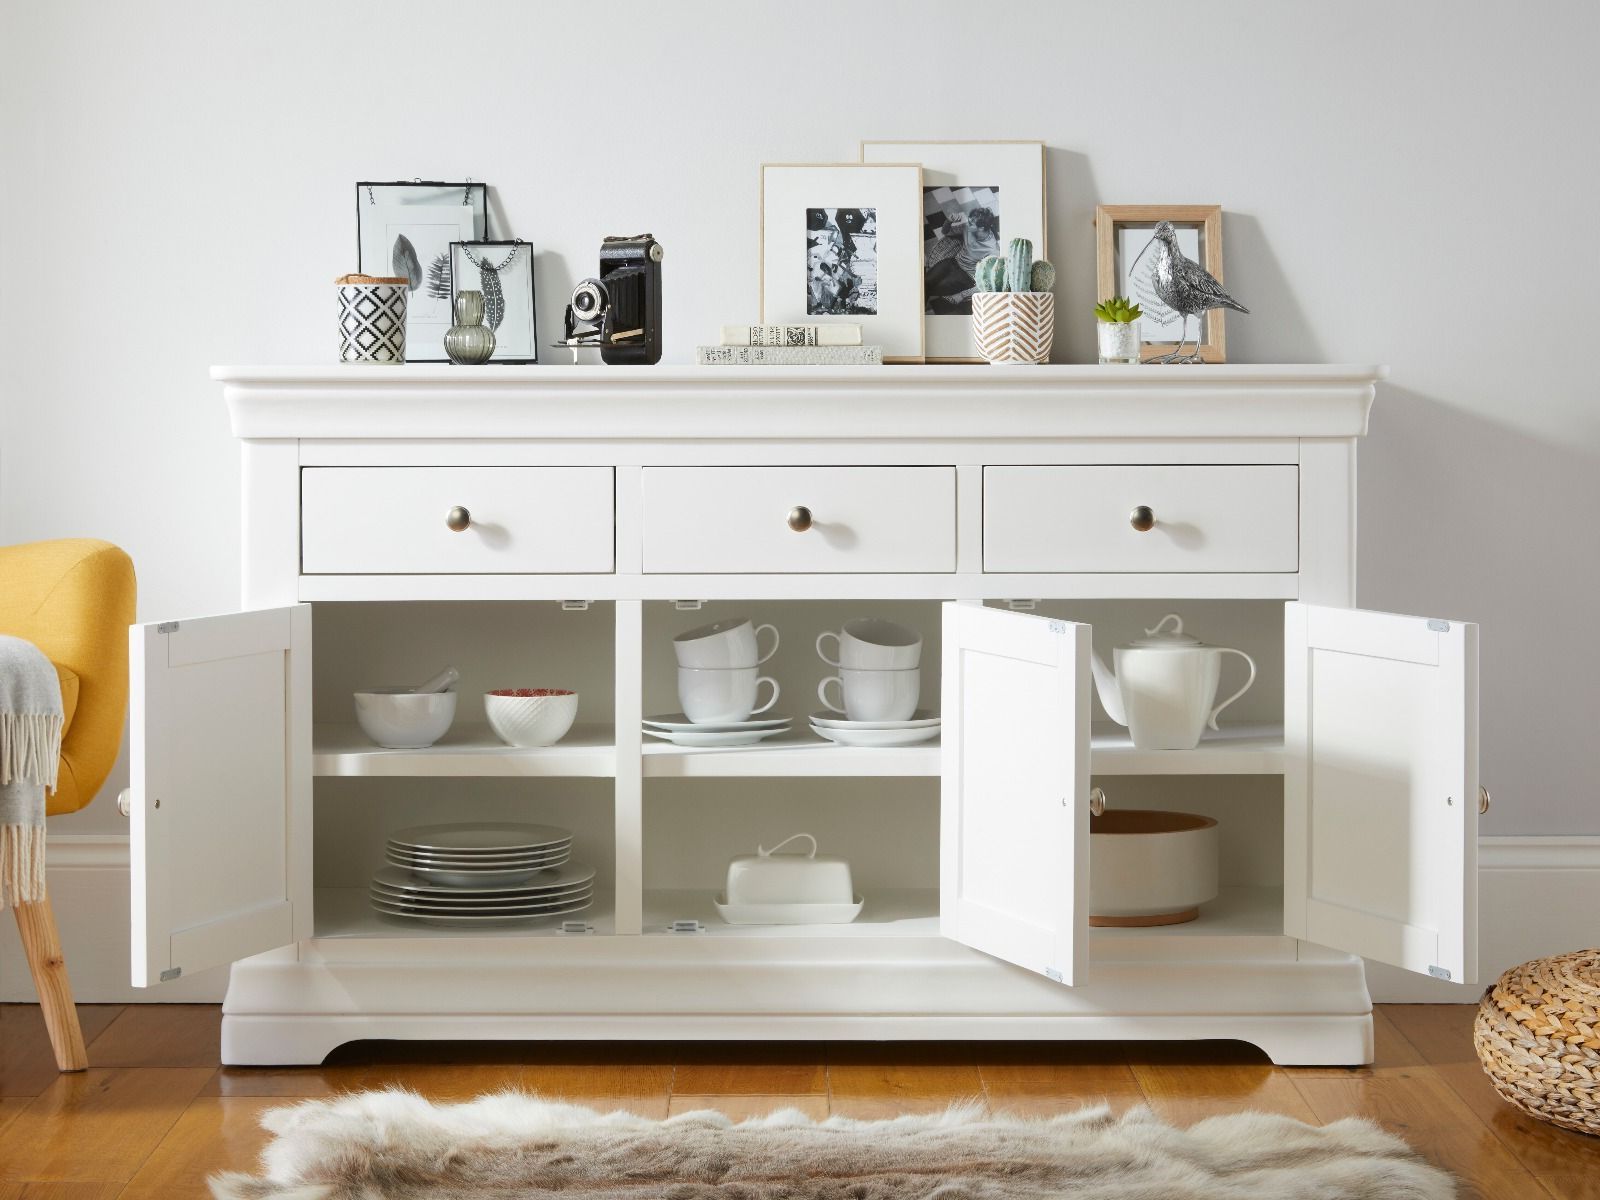 Toulouse 140cm Large White Painted Sideboard With Drawers | Fully Assembled Inside White Sideboards For Living Room (Gallery 2 of 20)